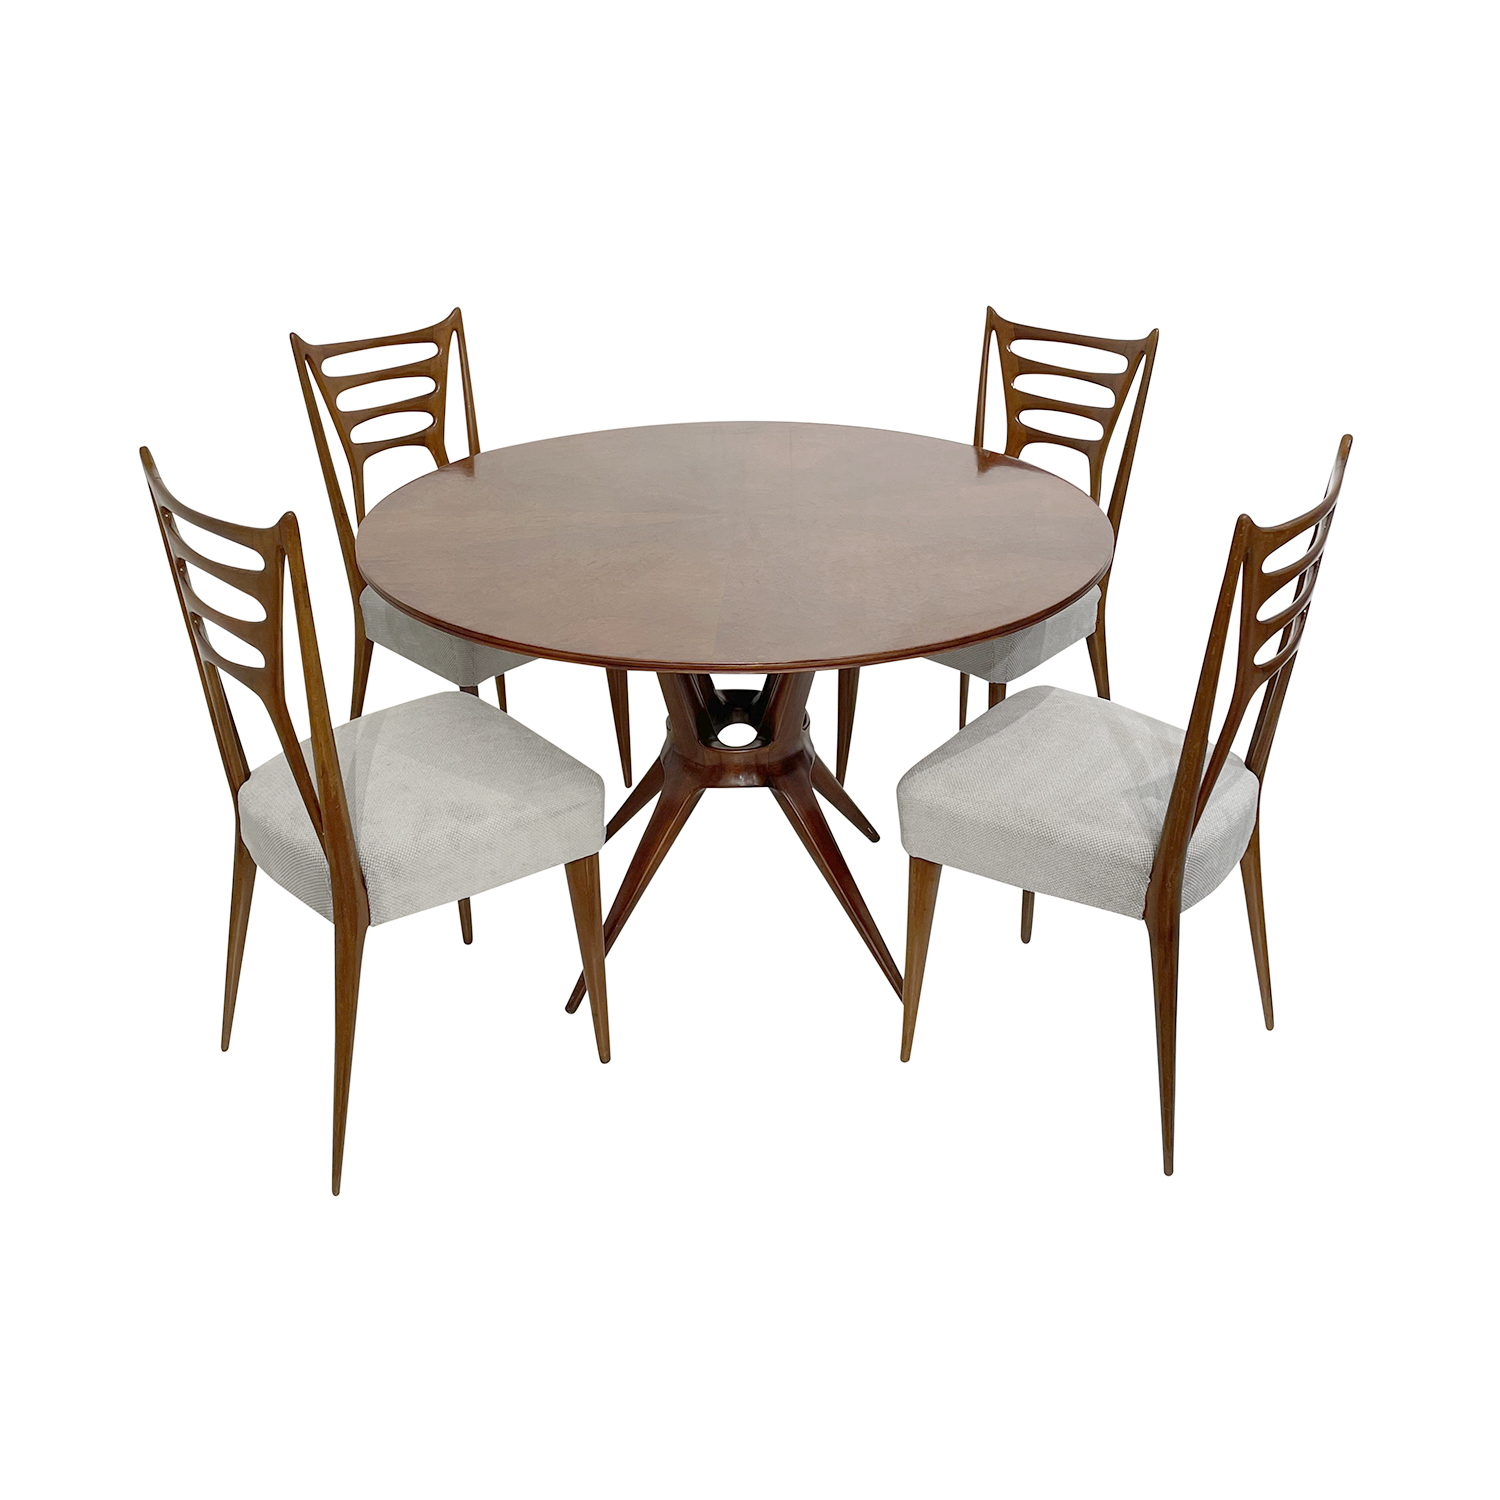 20th Century Italian Rosewood Dining Table with Four Chairs by Osvaldo Borsani